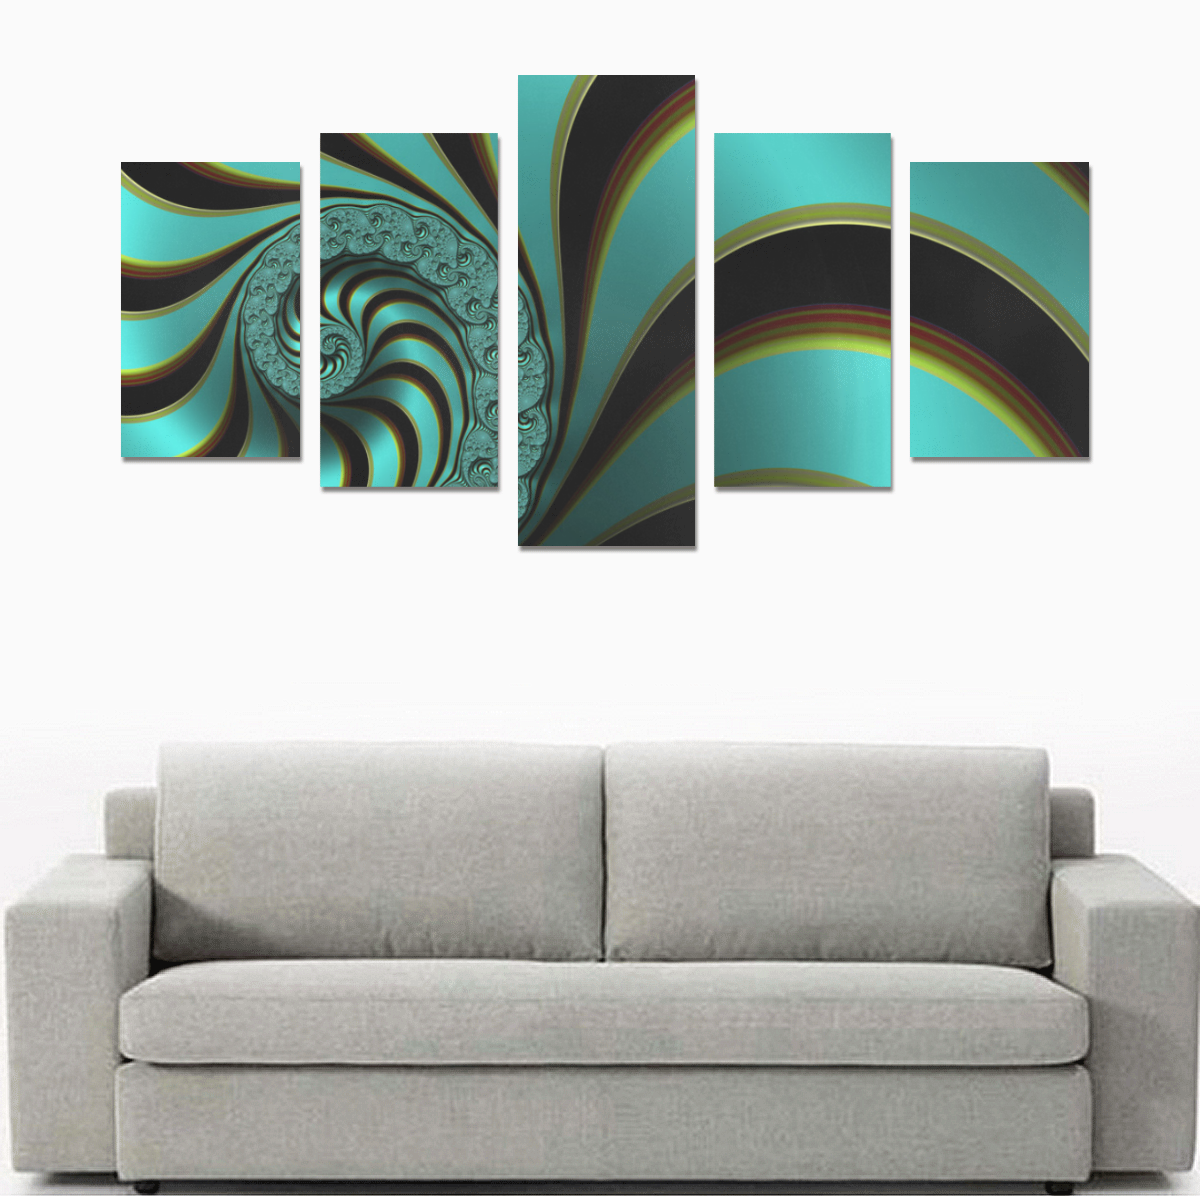 Turquoise Peacock Fine Abstract Spiral Fractal Canvas Print Sets C (No Frame)